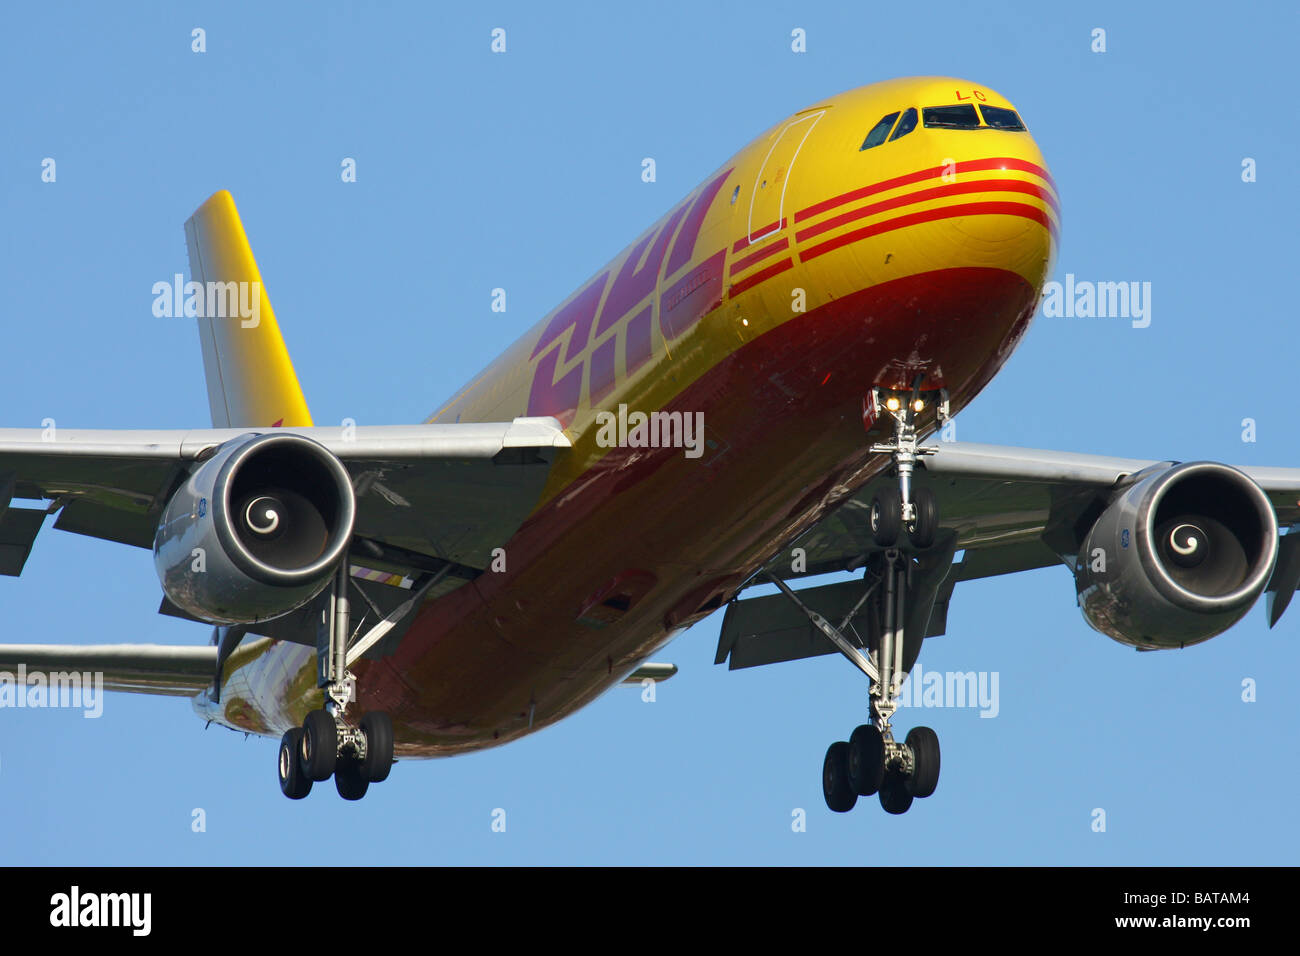 Cargo aircraft - Airbus A300 from DHL company landing on London Heathrow Stock Photo